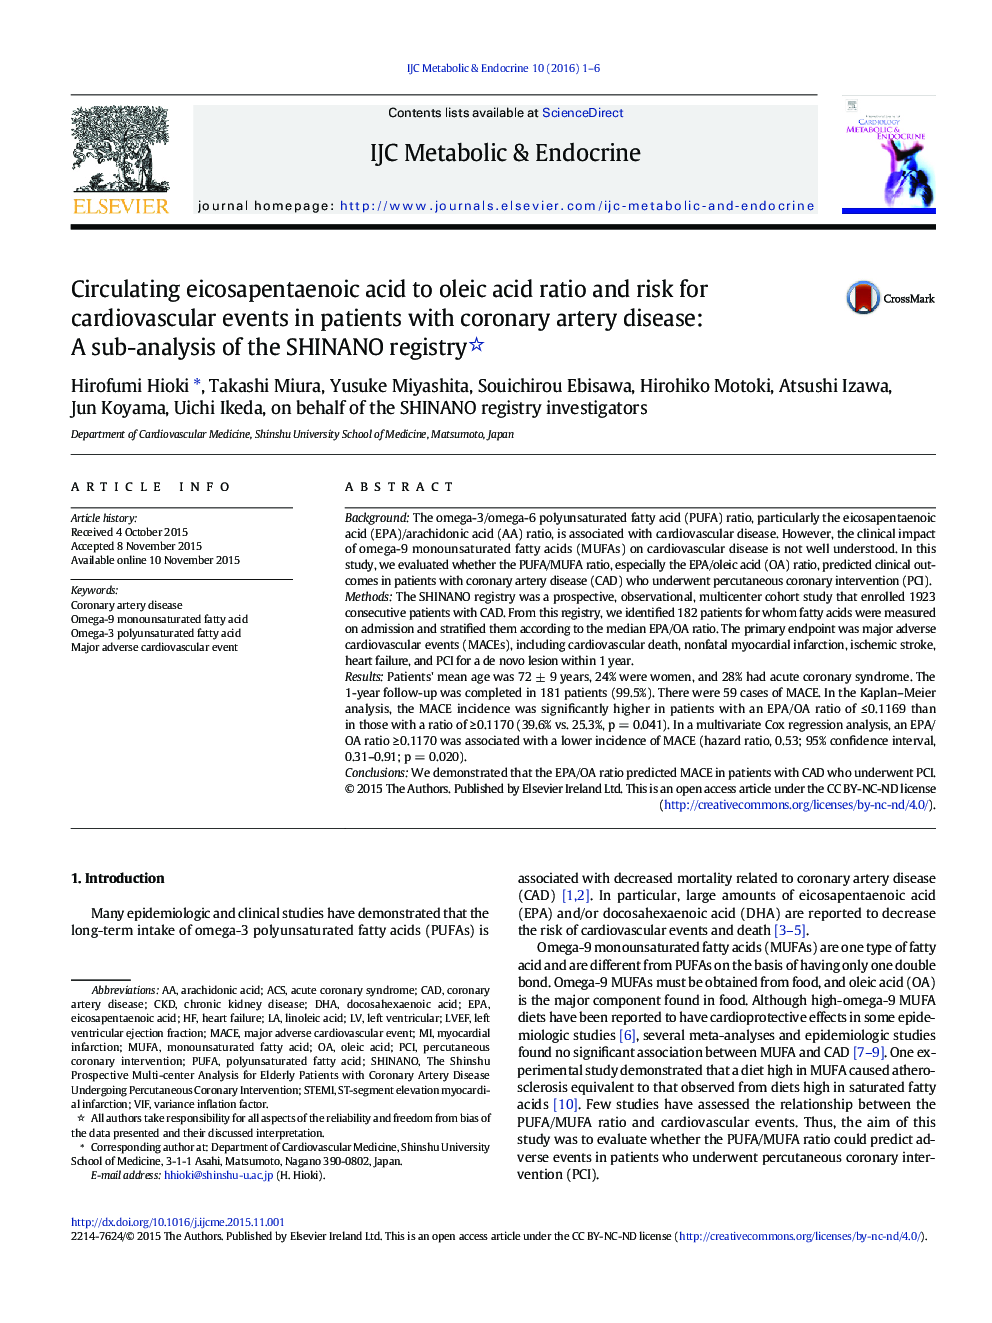 Circulating eicosapentaenoic acid to oleic acid ratio and risk for cardiovascular events in patients with coronary artery disease: A sub-analysis of the SHINANO registry 